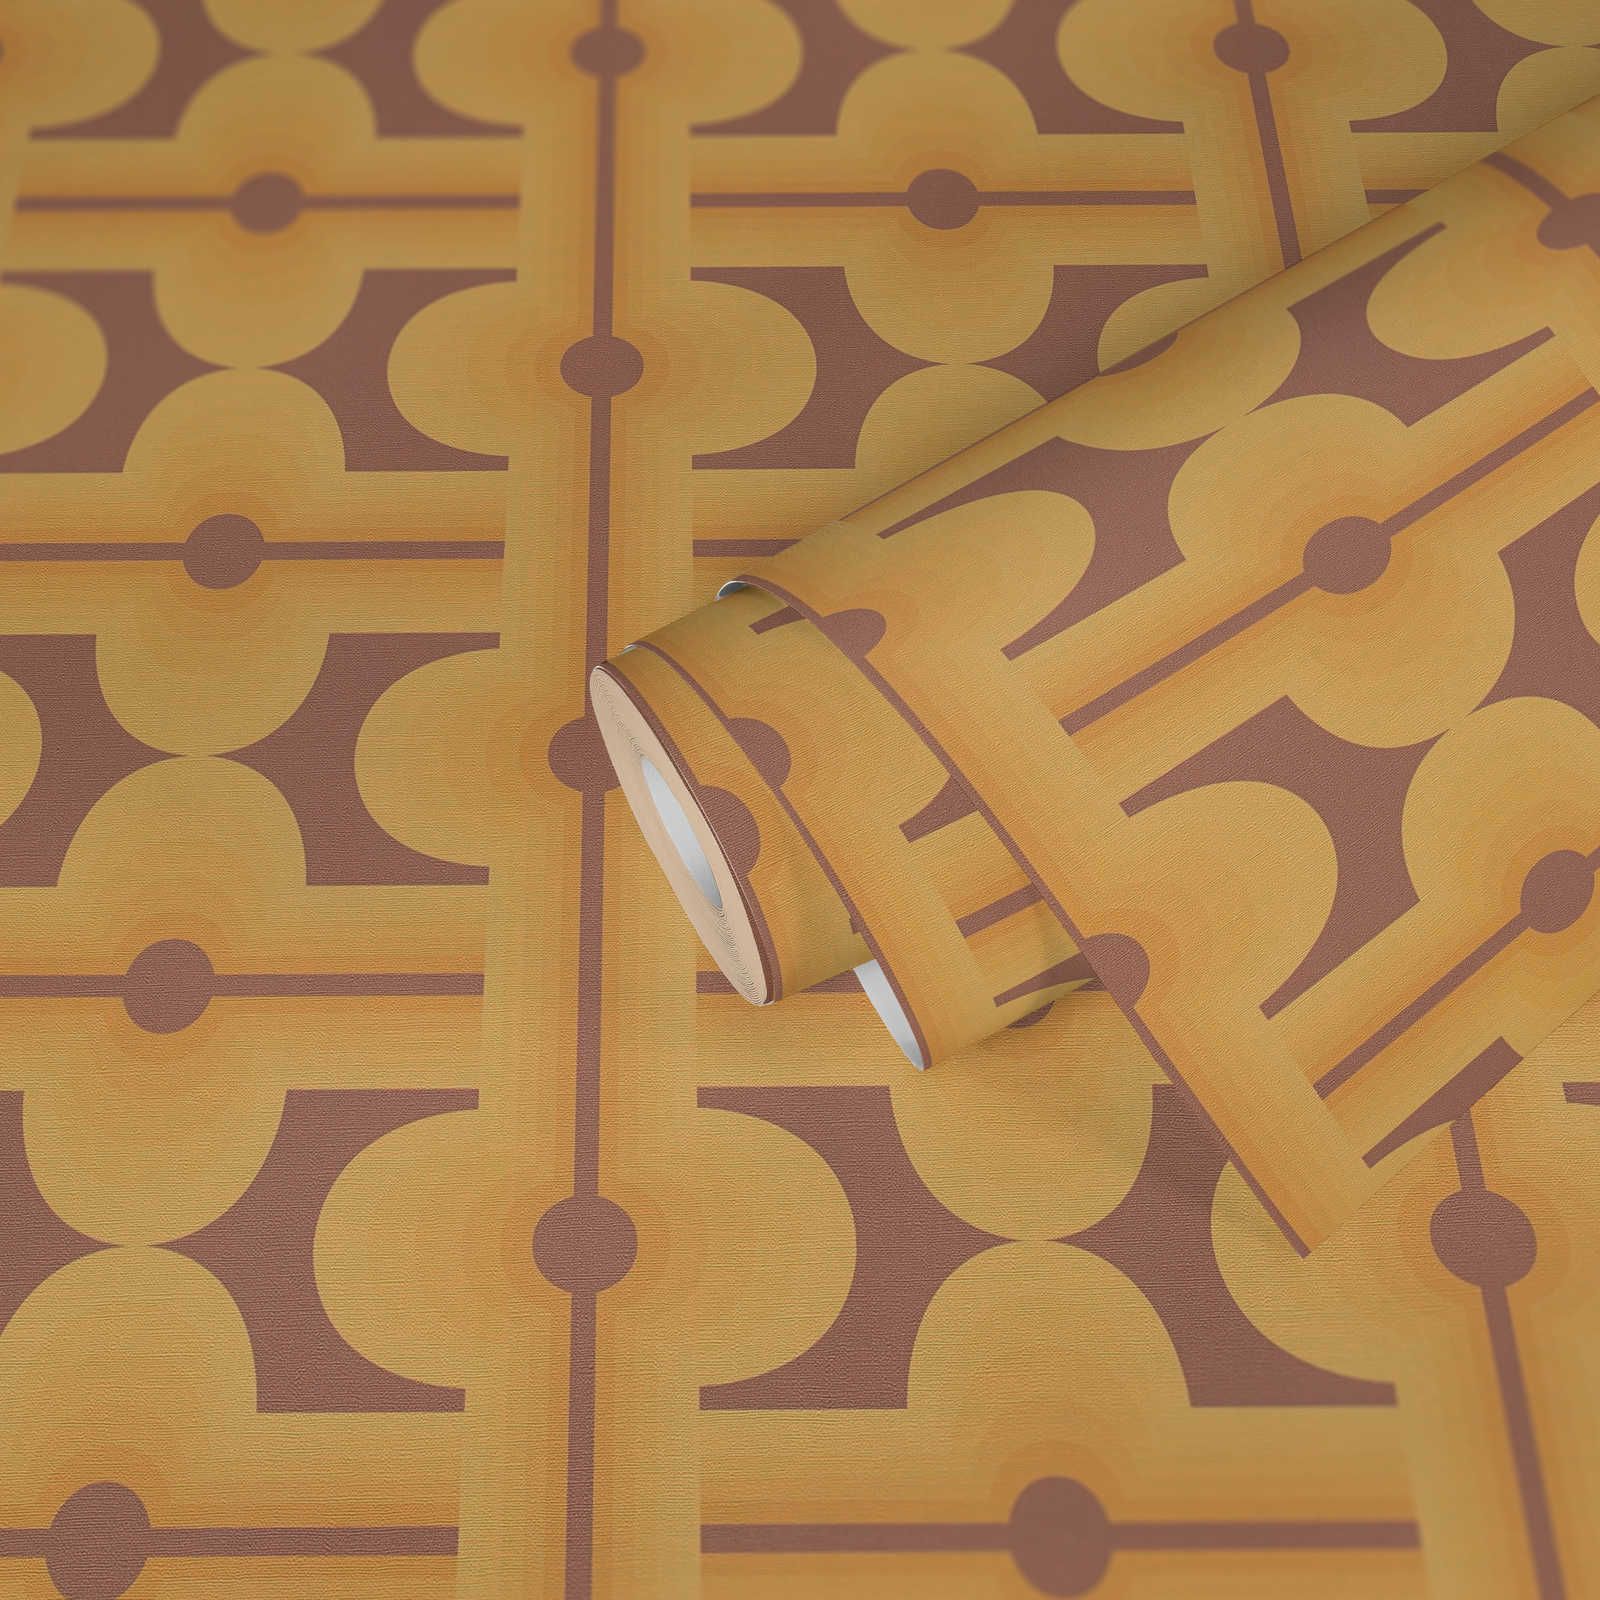             Abstract patterns on 70s non-woven wallpaper in warm colours - brown, yellow, orange
        